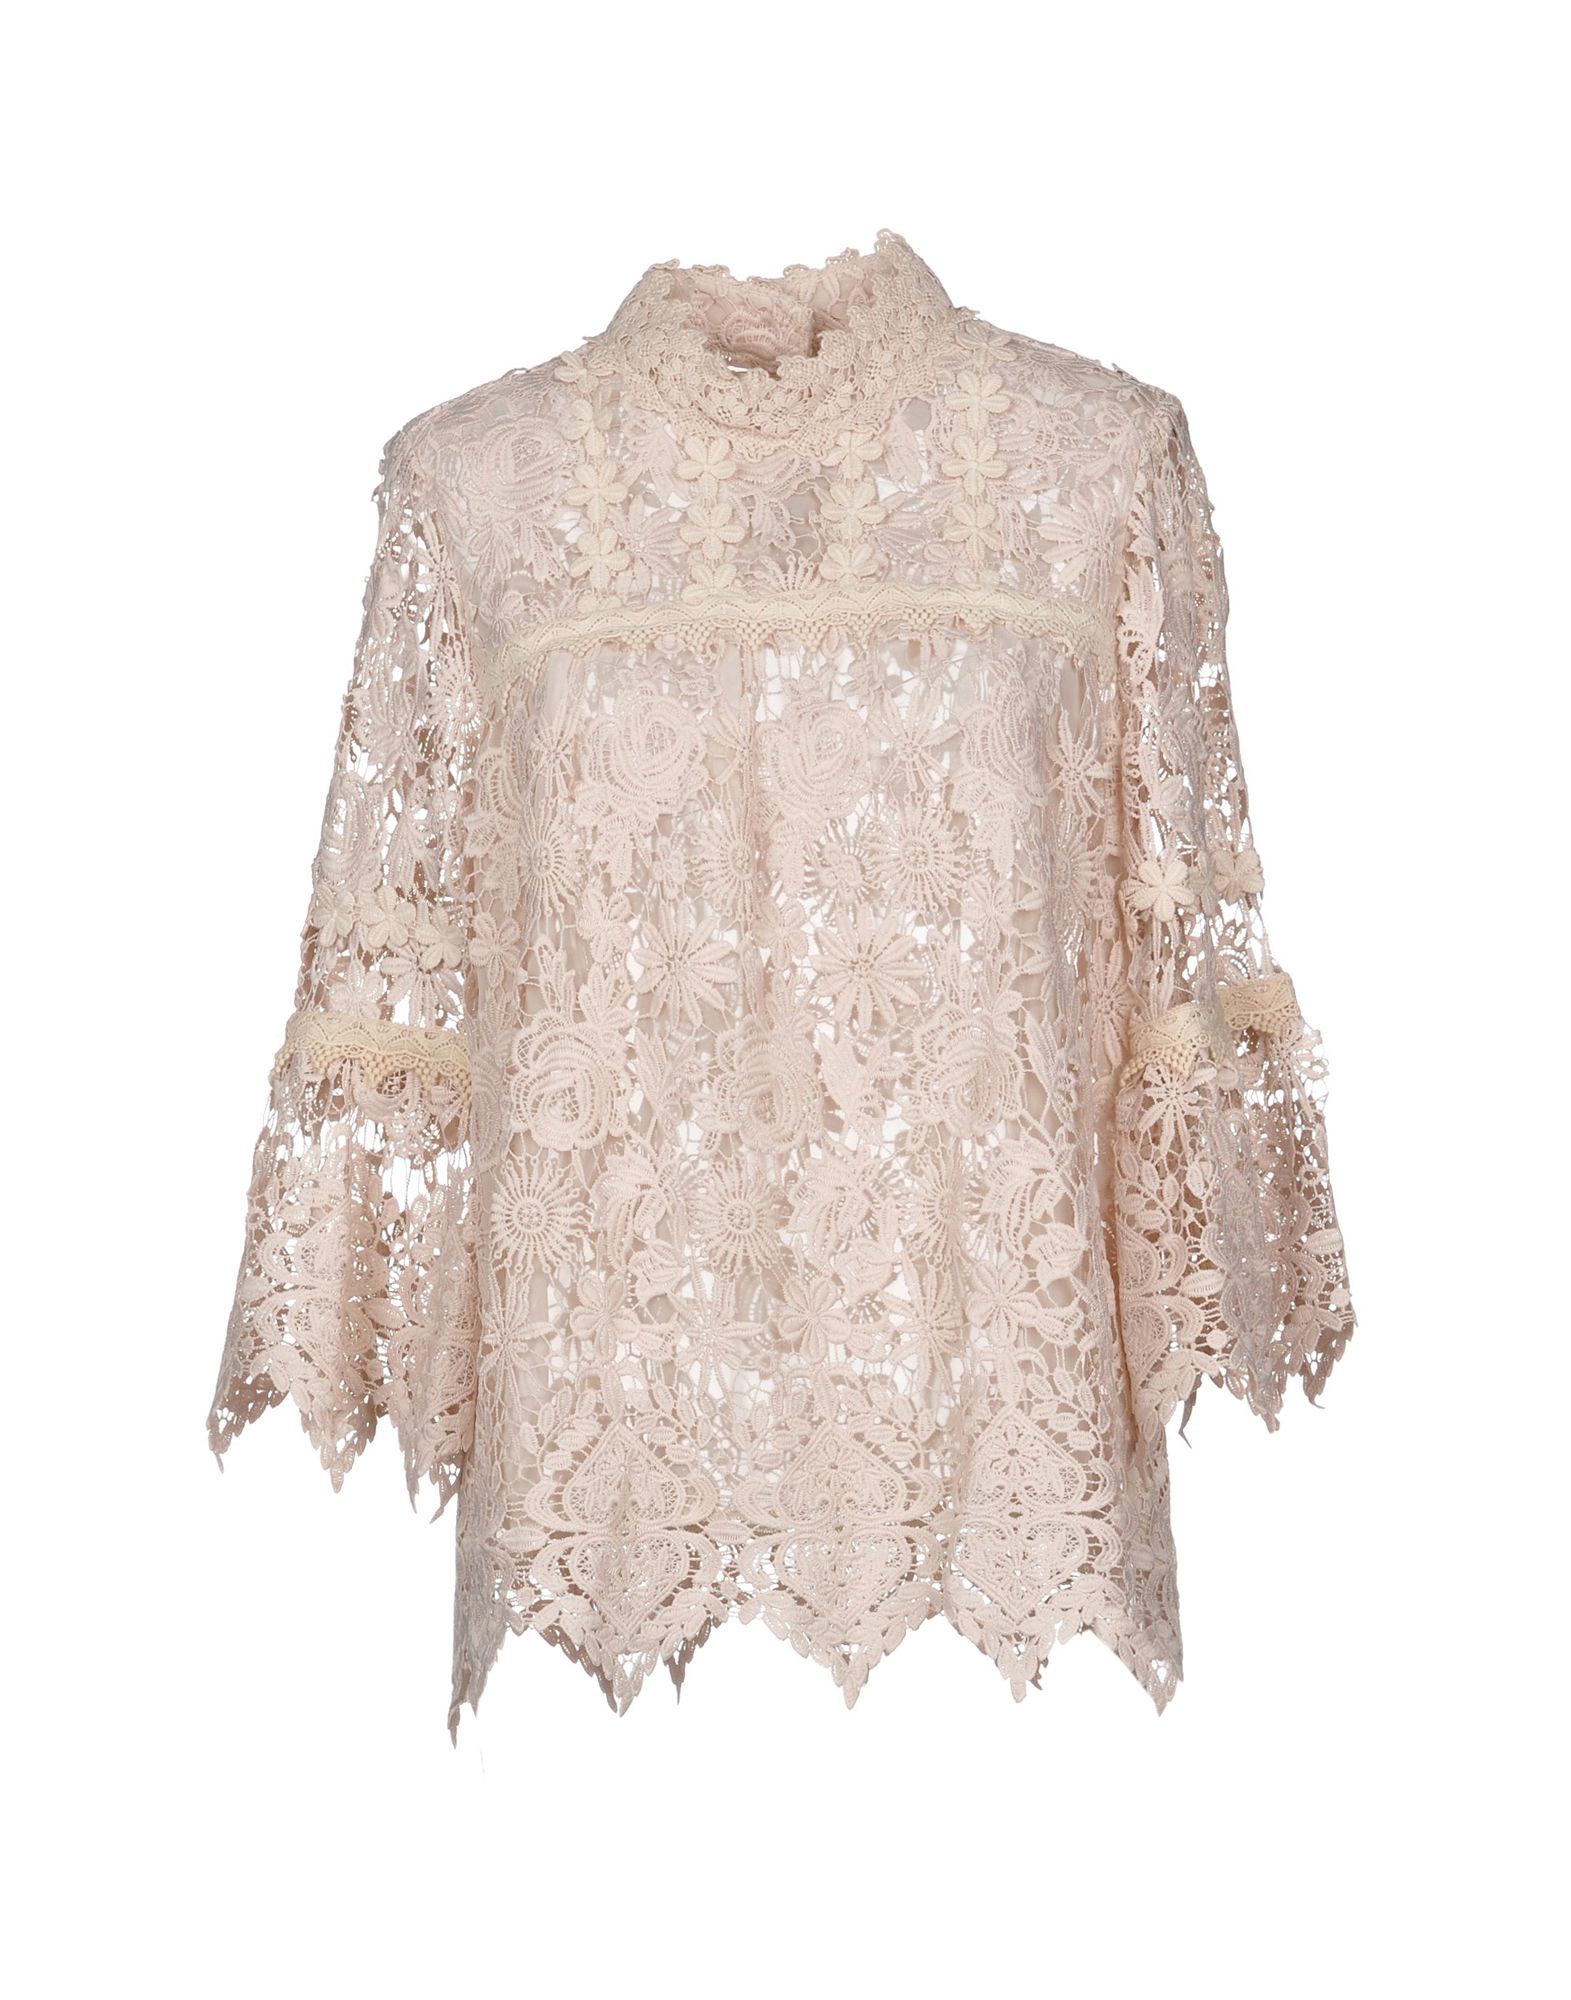 ANNA SUI BLOUSES,38736917MN 4